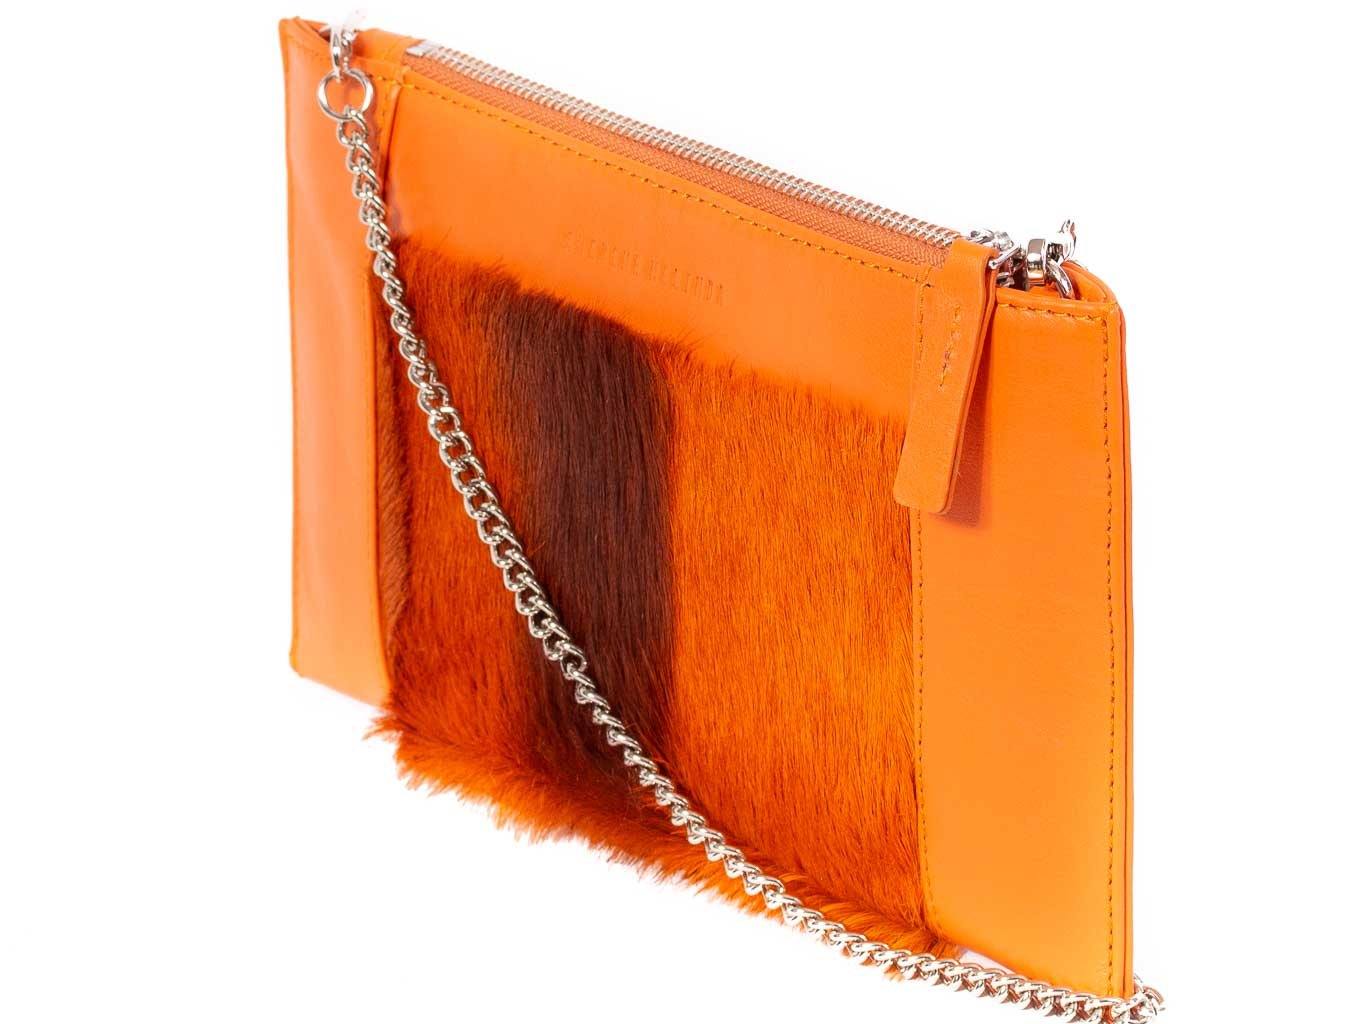 Clutch Springbok Handbag in Orange with a stripe feature by Sherene Melinda side angle strap